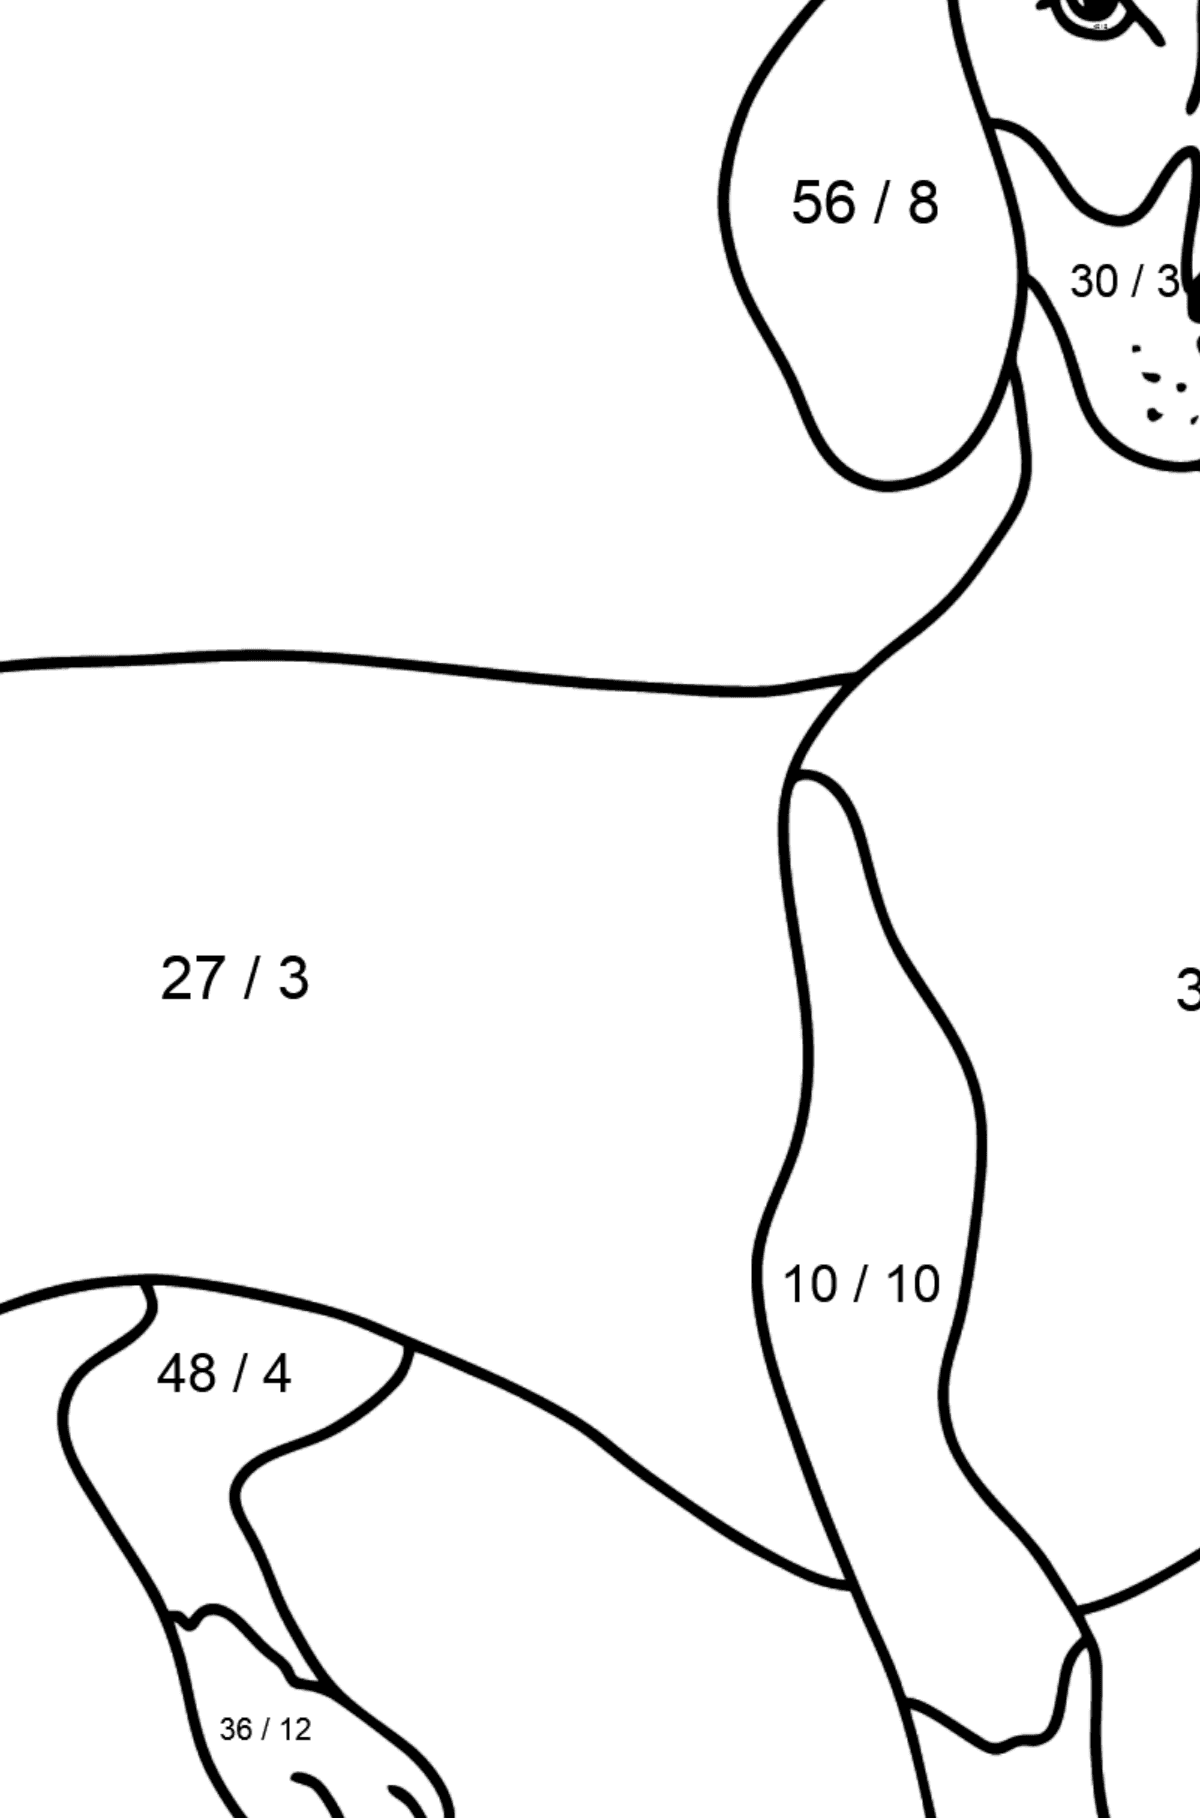 Dachshund coloring page - Math Coloring - Division for Kids